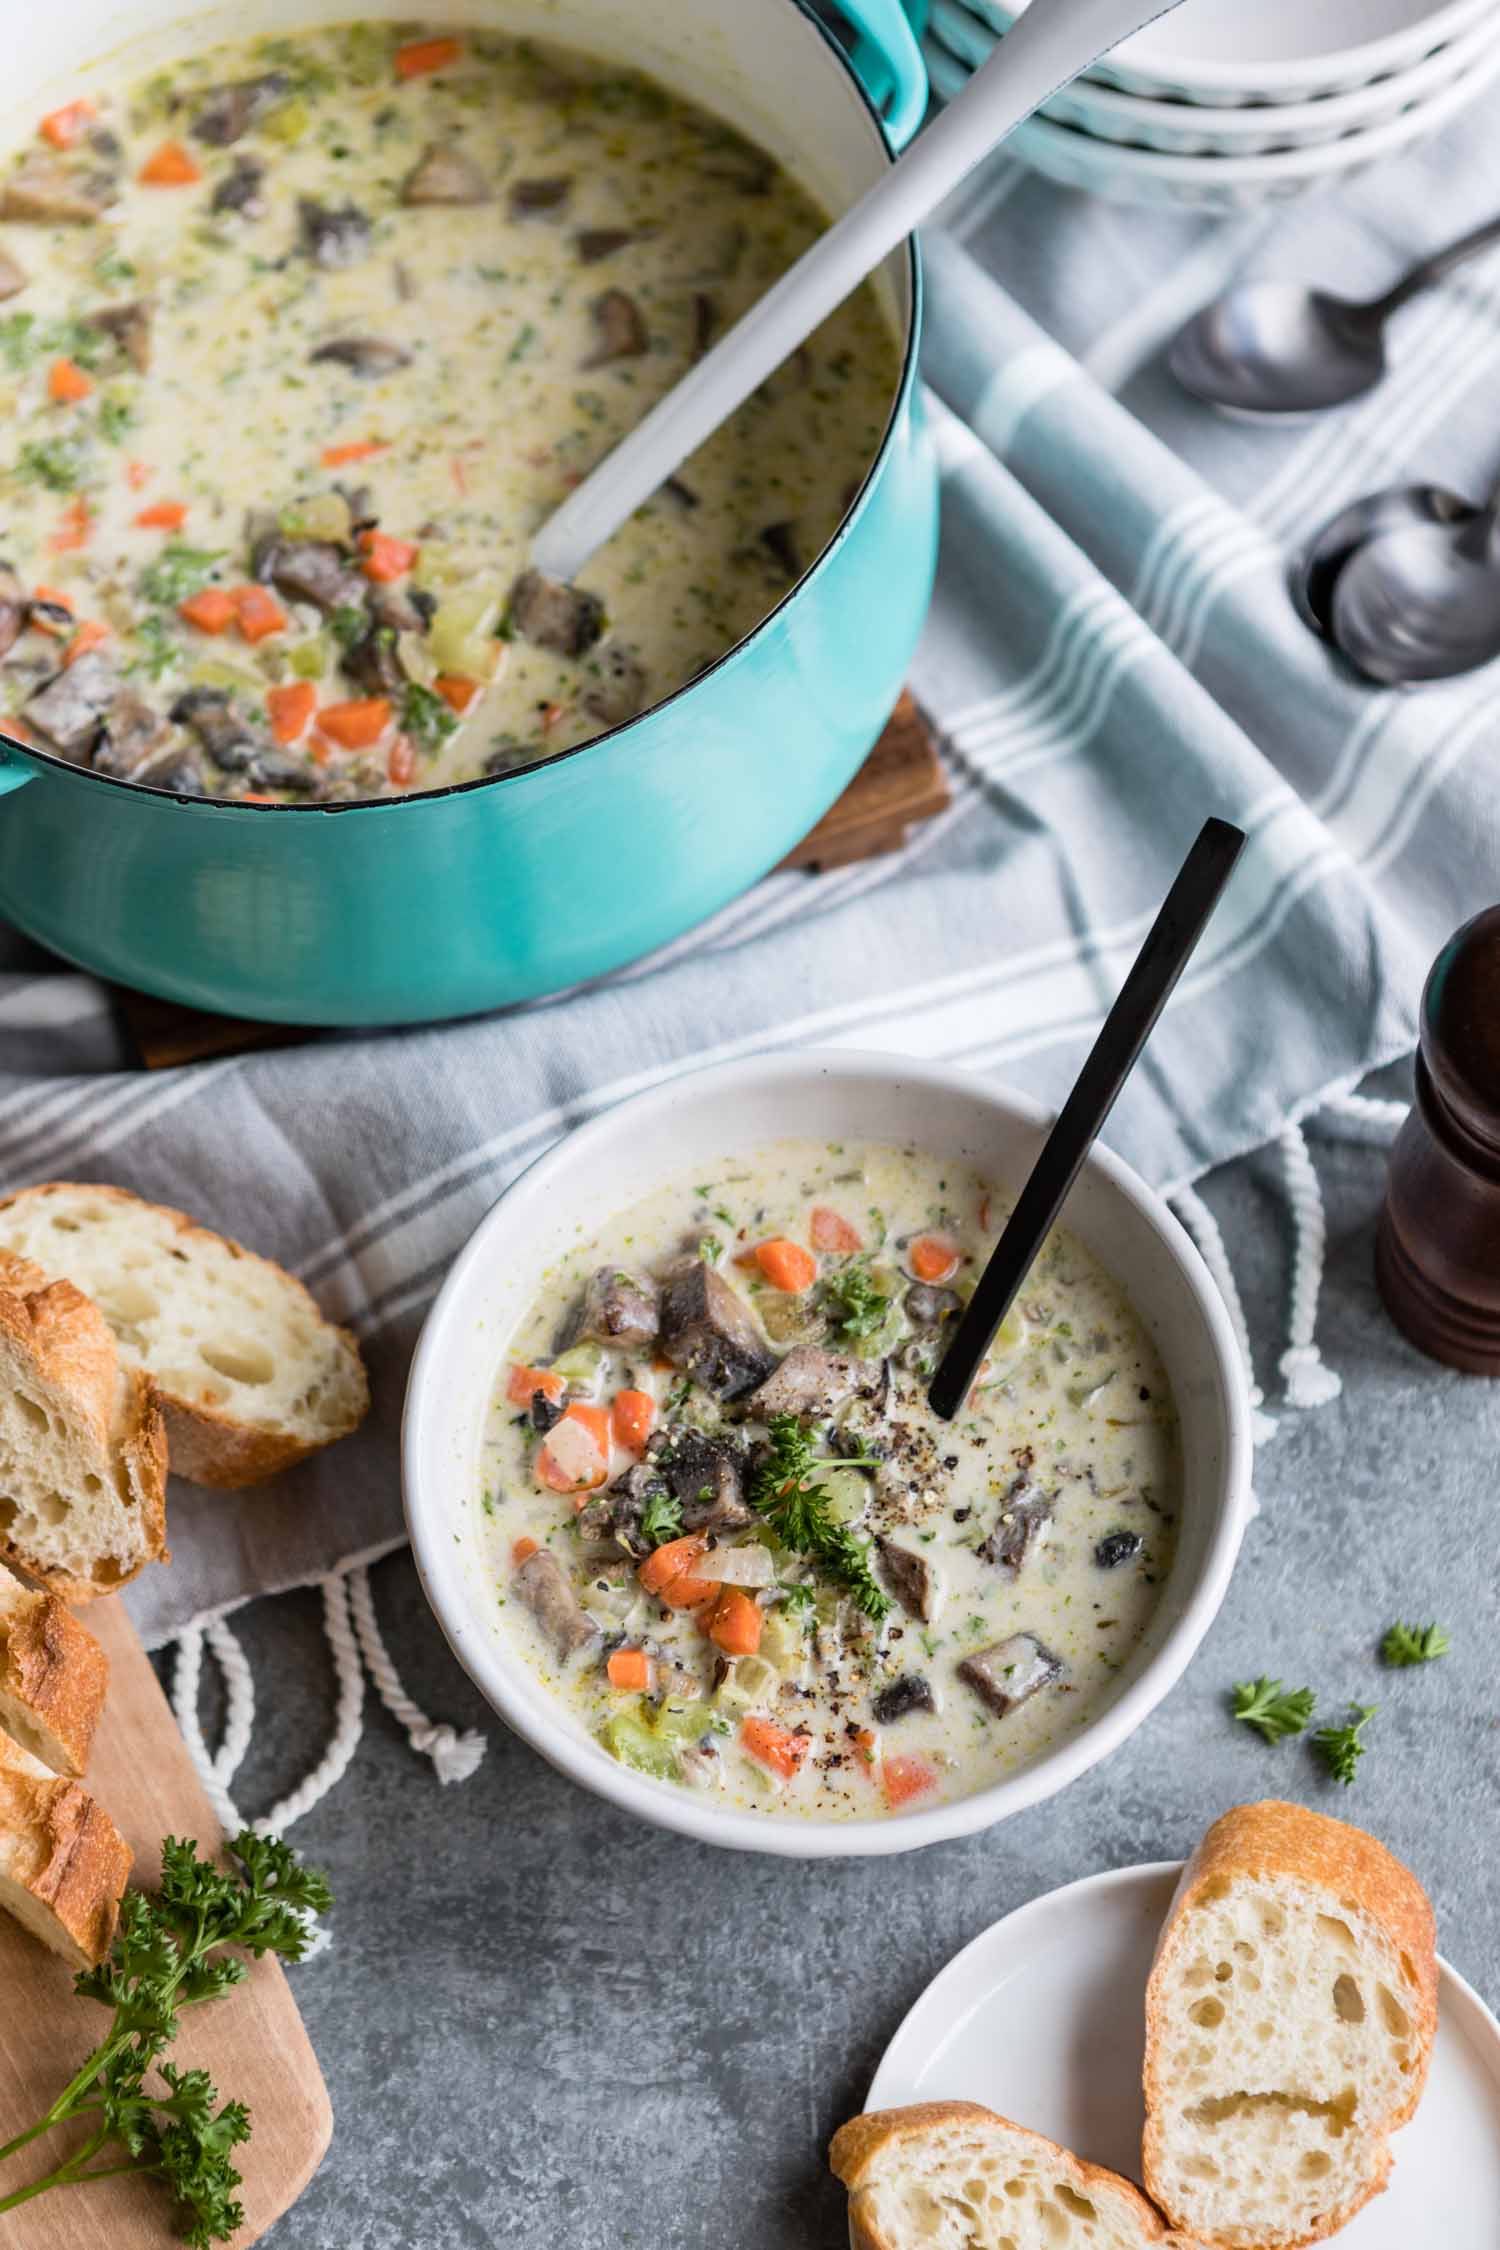 7 Cozy Fall Soups to Add to Your Meal Plan